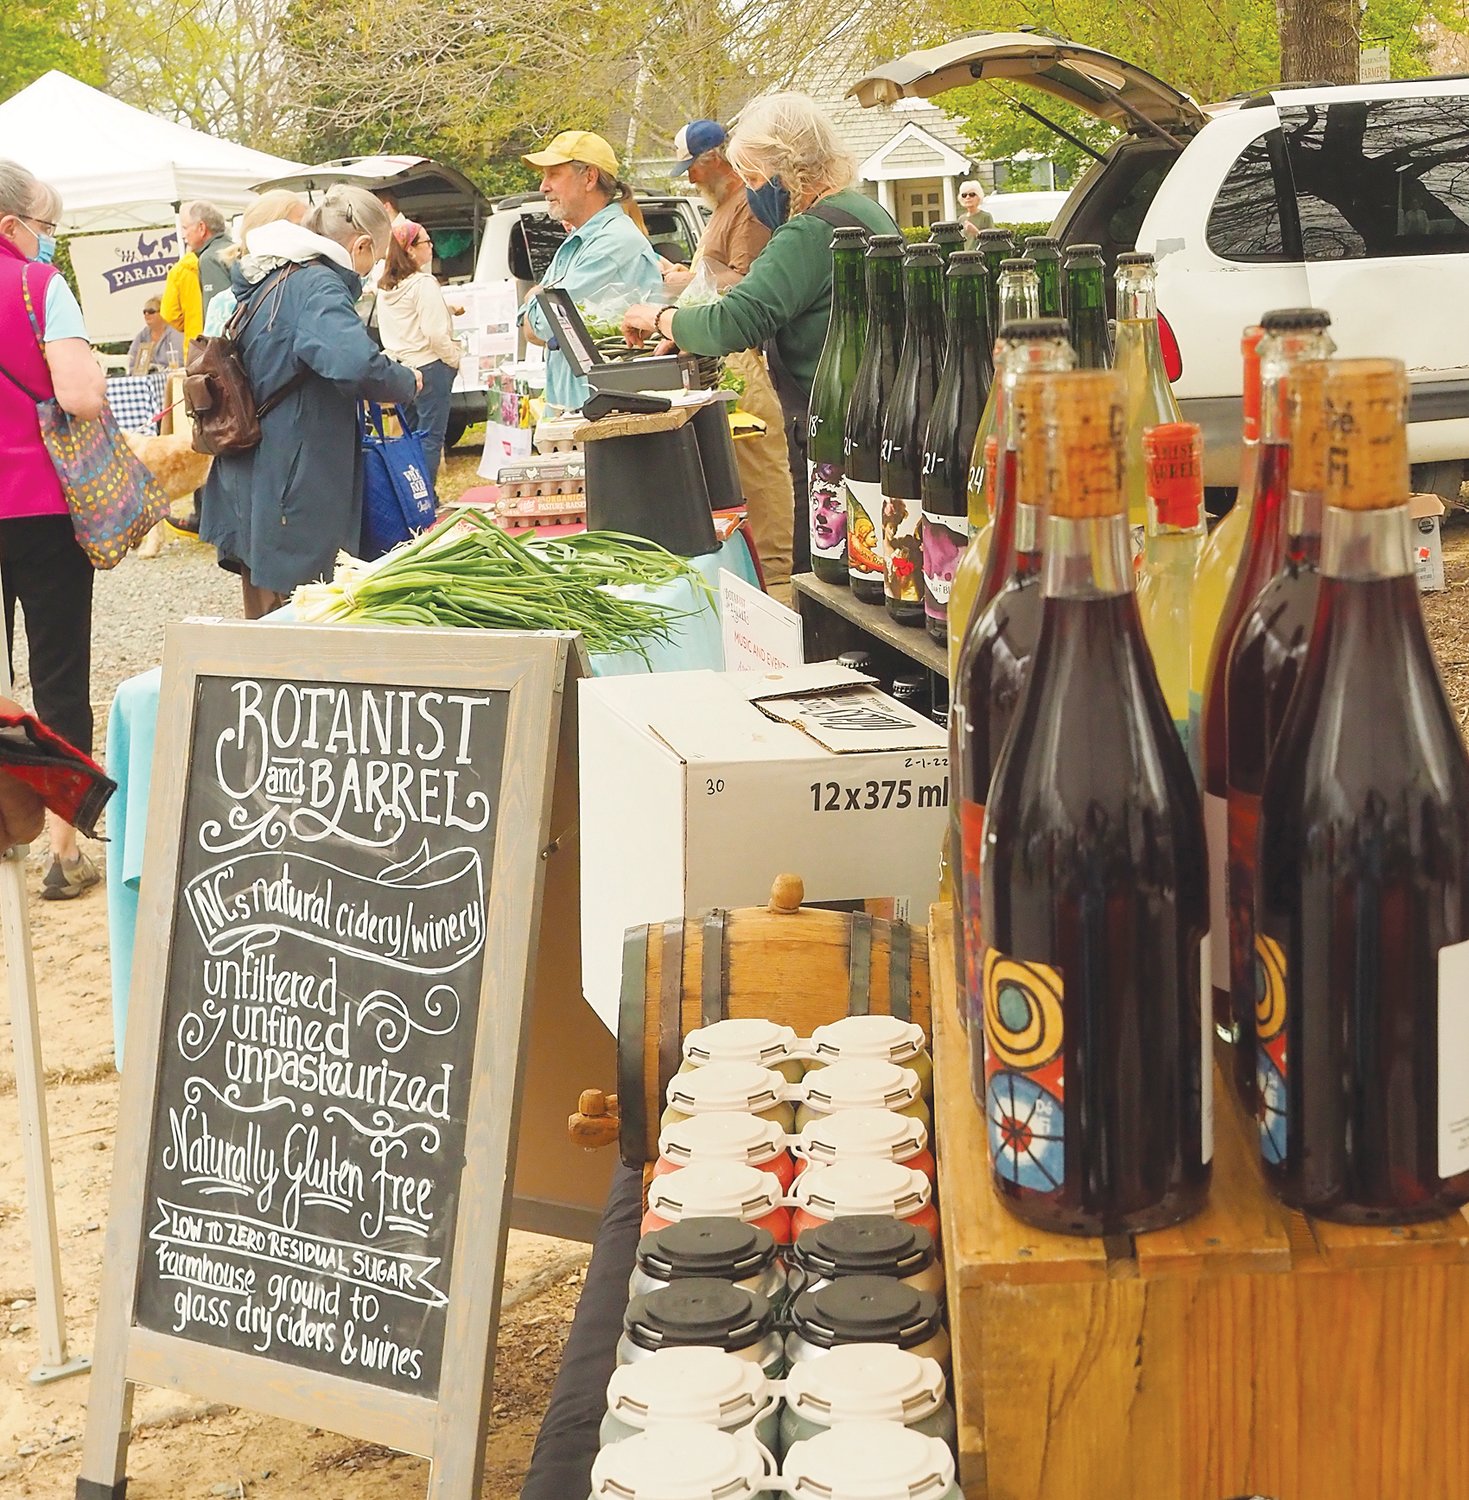 Fearrington's market features a variety of locally-produces wines.